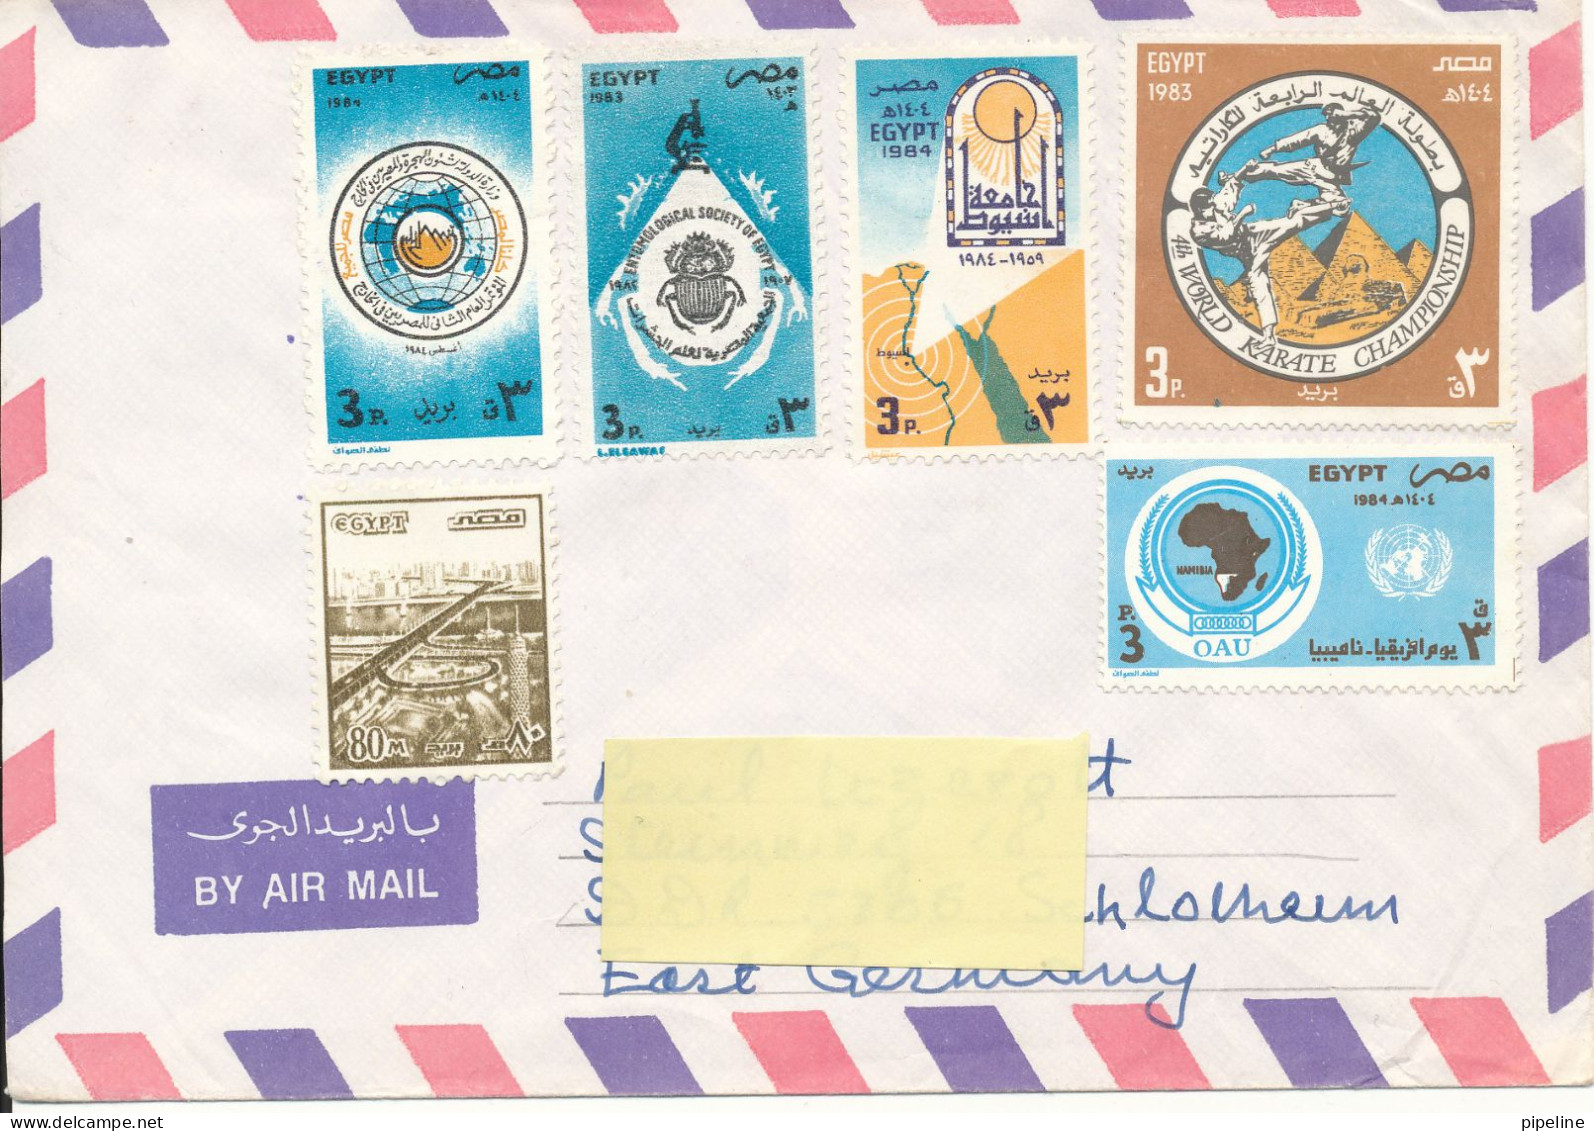 Egypt Air Mail Cover Sent To Germany DDR Topic Stamps No Postmarks On Stamps Or Cover - Luftpost